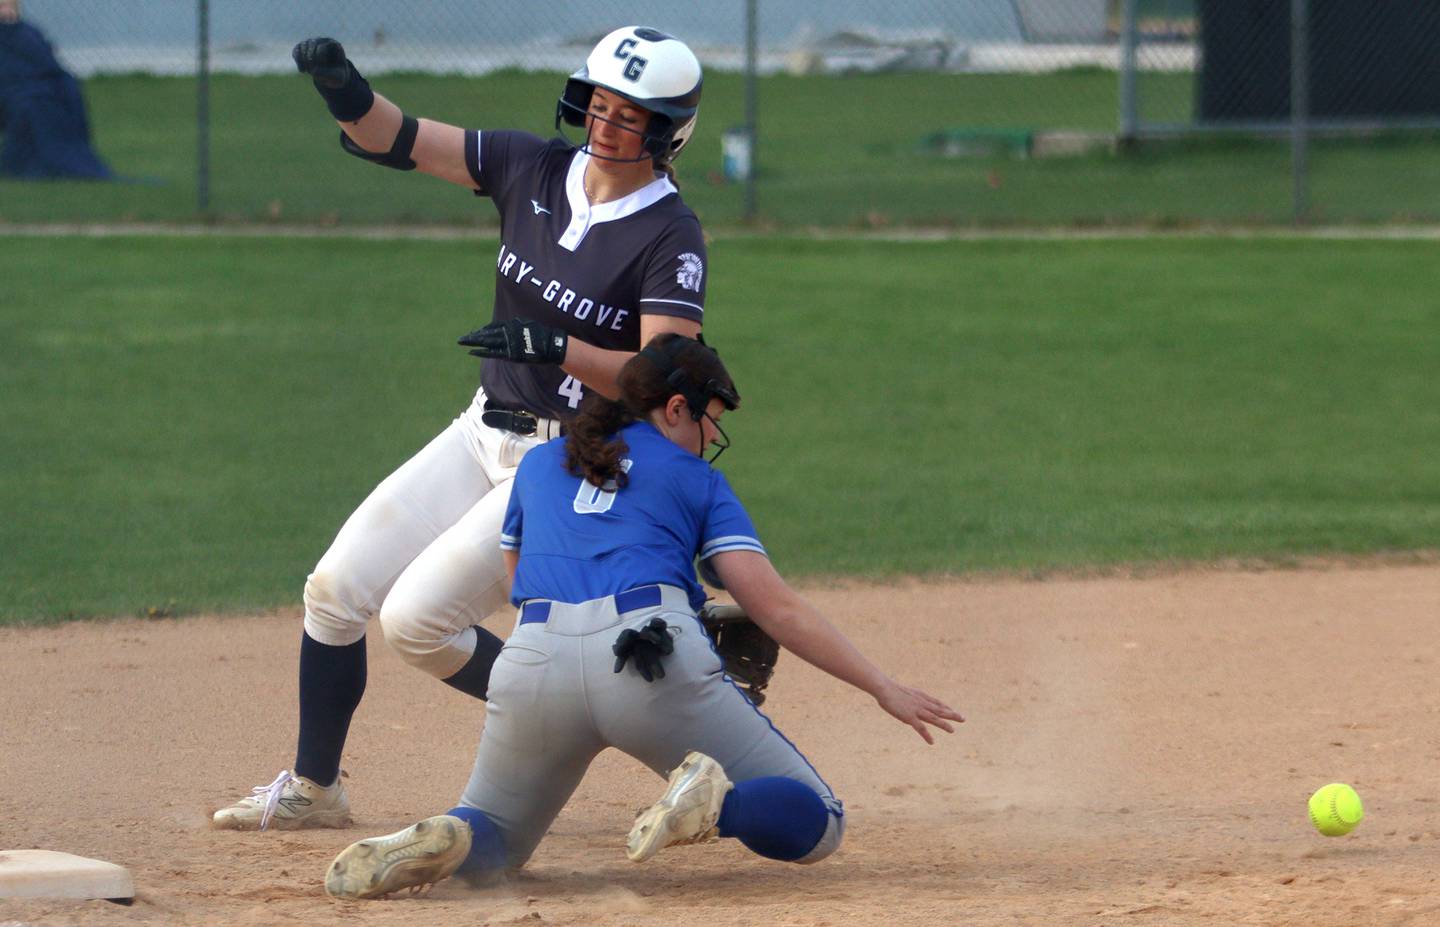 Cary-Grove’s Maddie Crick hustles to third base with a triple against Burlington Central in varsity softball at Cary Monday. With the triple, Crick hit for the cycle.